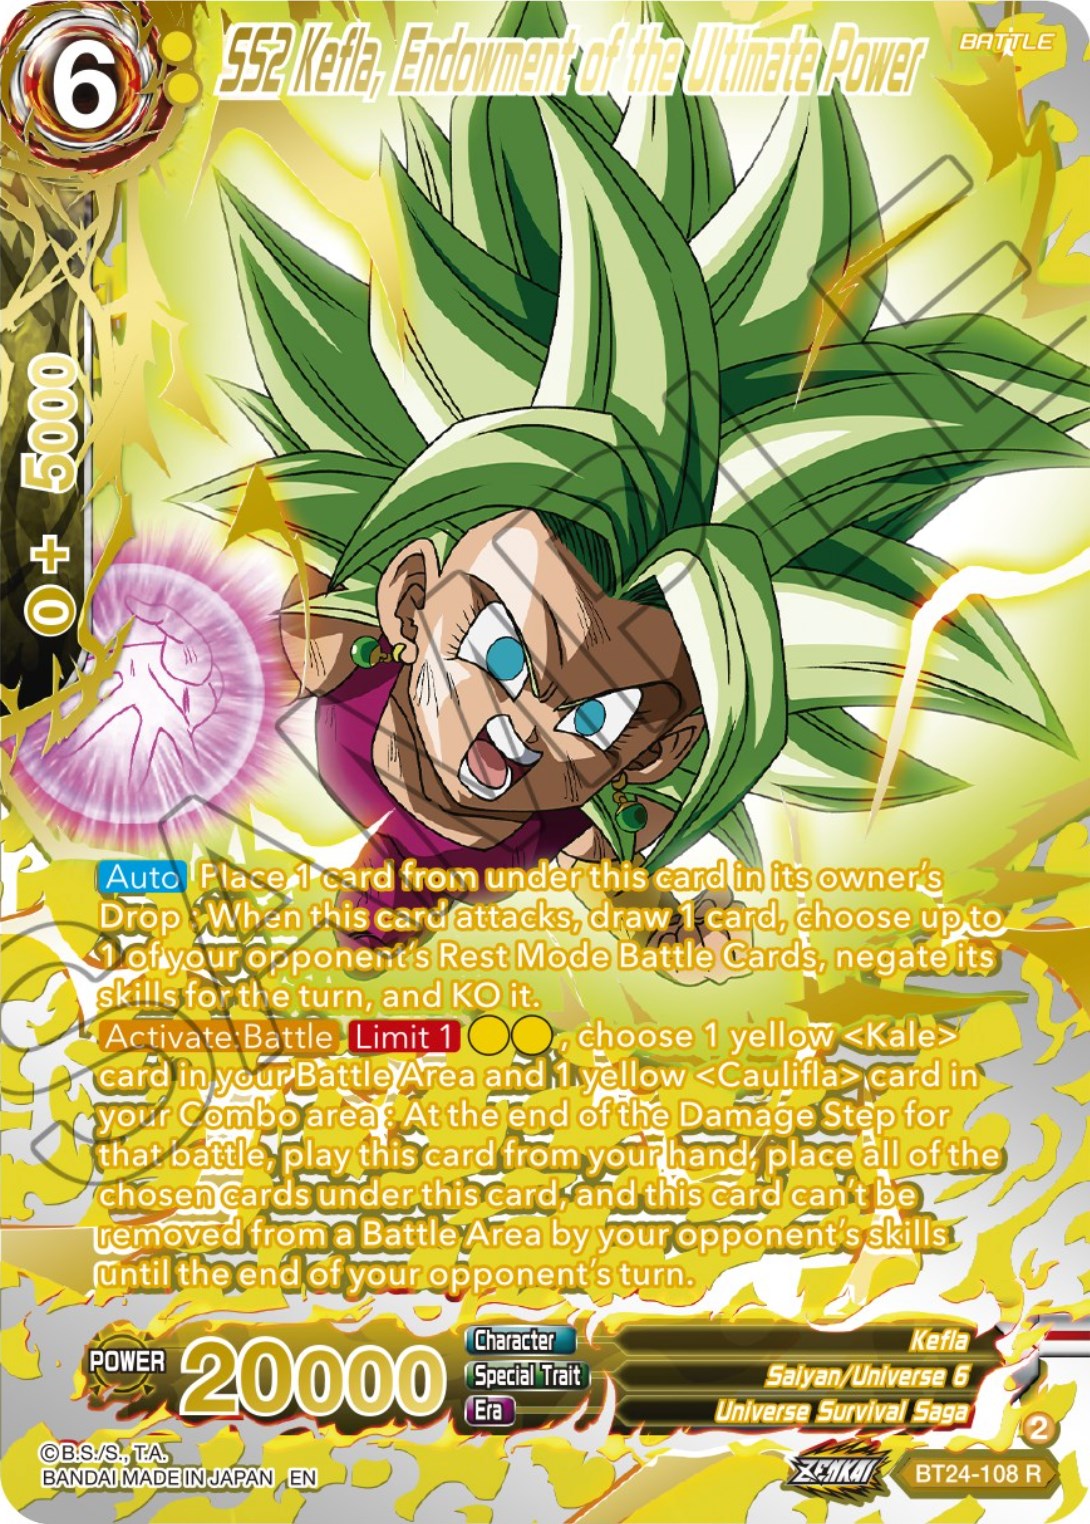 SS2 Kefla, Endowment of the Ultimate Power (Collector Booster) (BT24-108) [Beyond Generations] | Pegasus Games WI